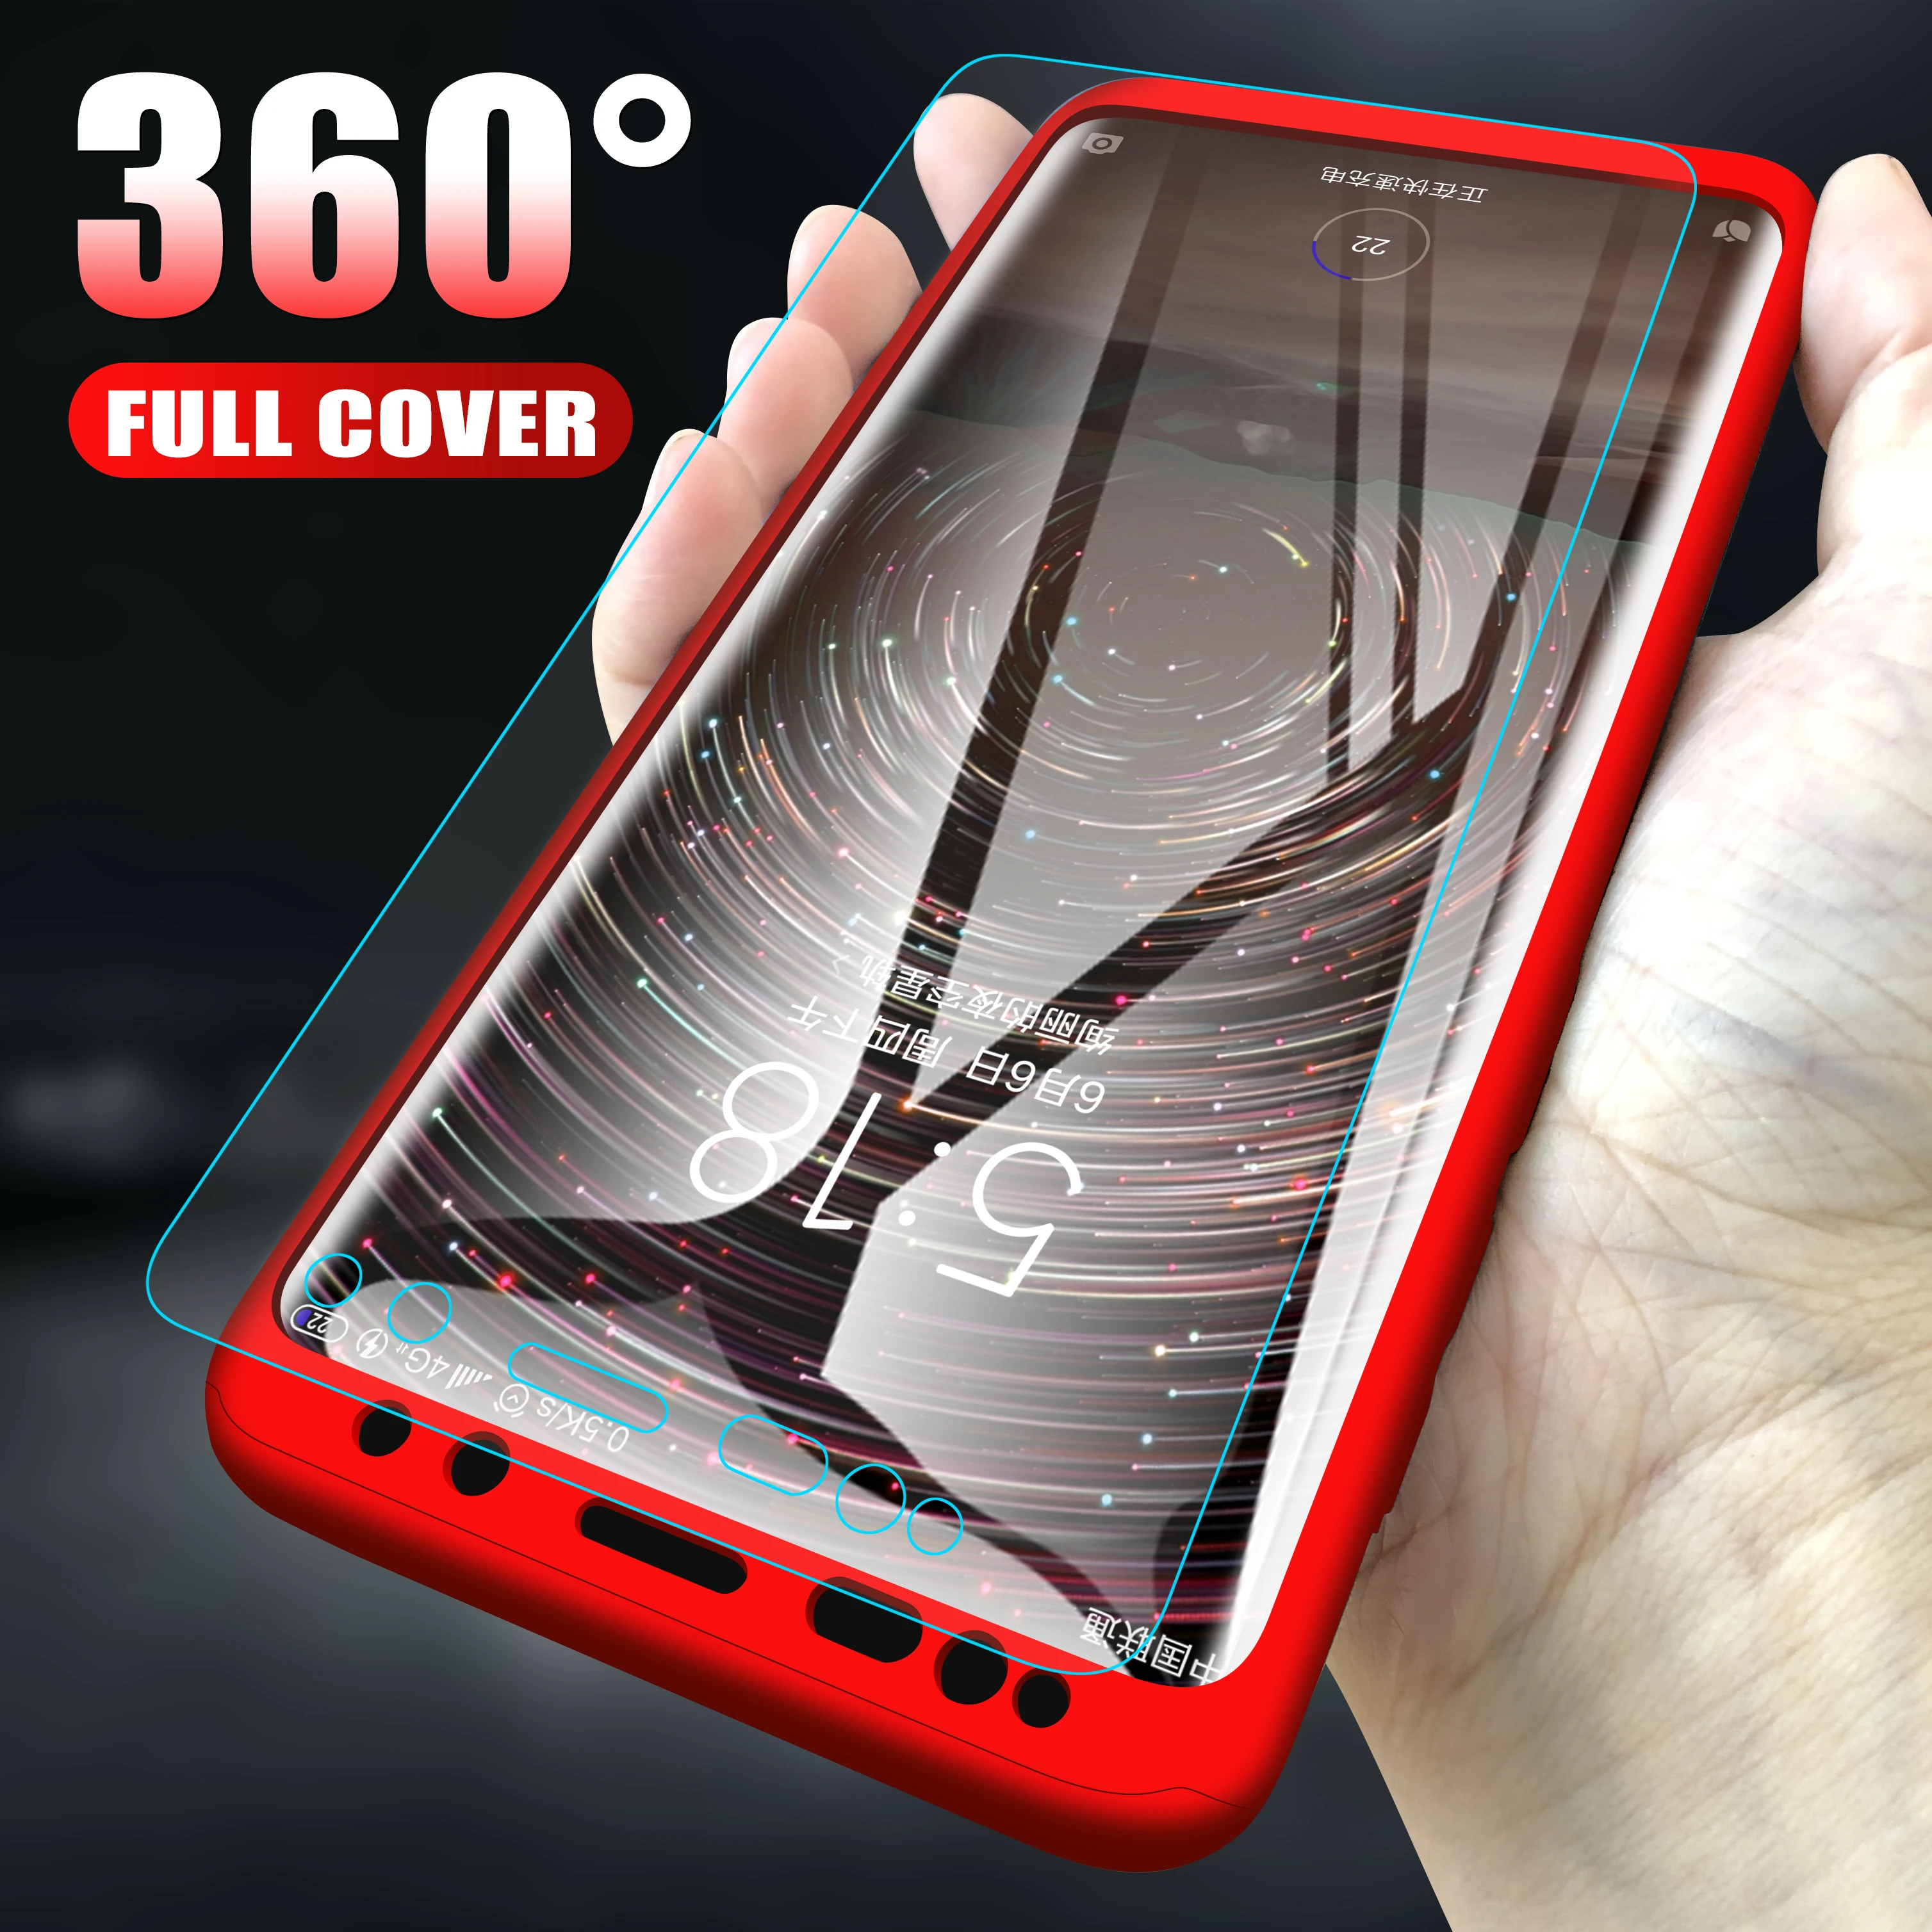 360 Full Cover Protective Phone Case For Xiaomi Redmi 7A 6A 5A 4A 4X 5 Plus K20 GO Cases For Redmi Note 7 6 5 4 Pro With Glass